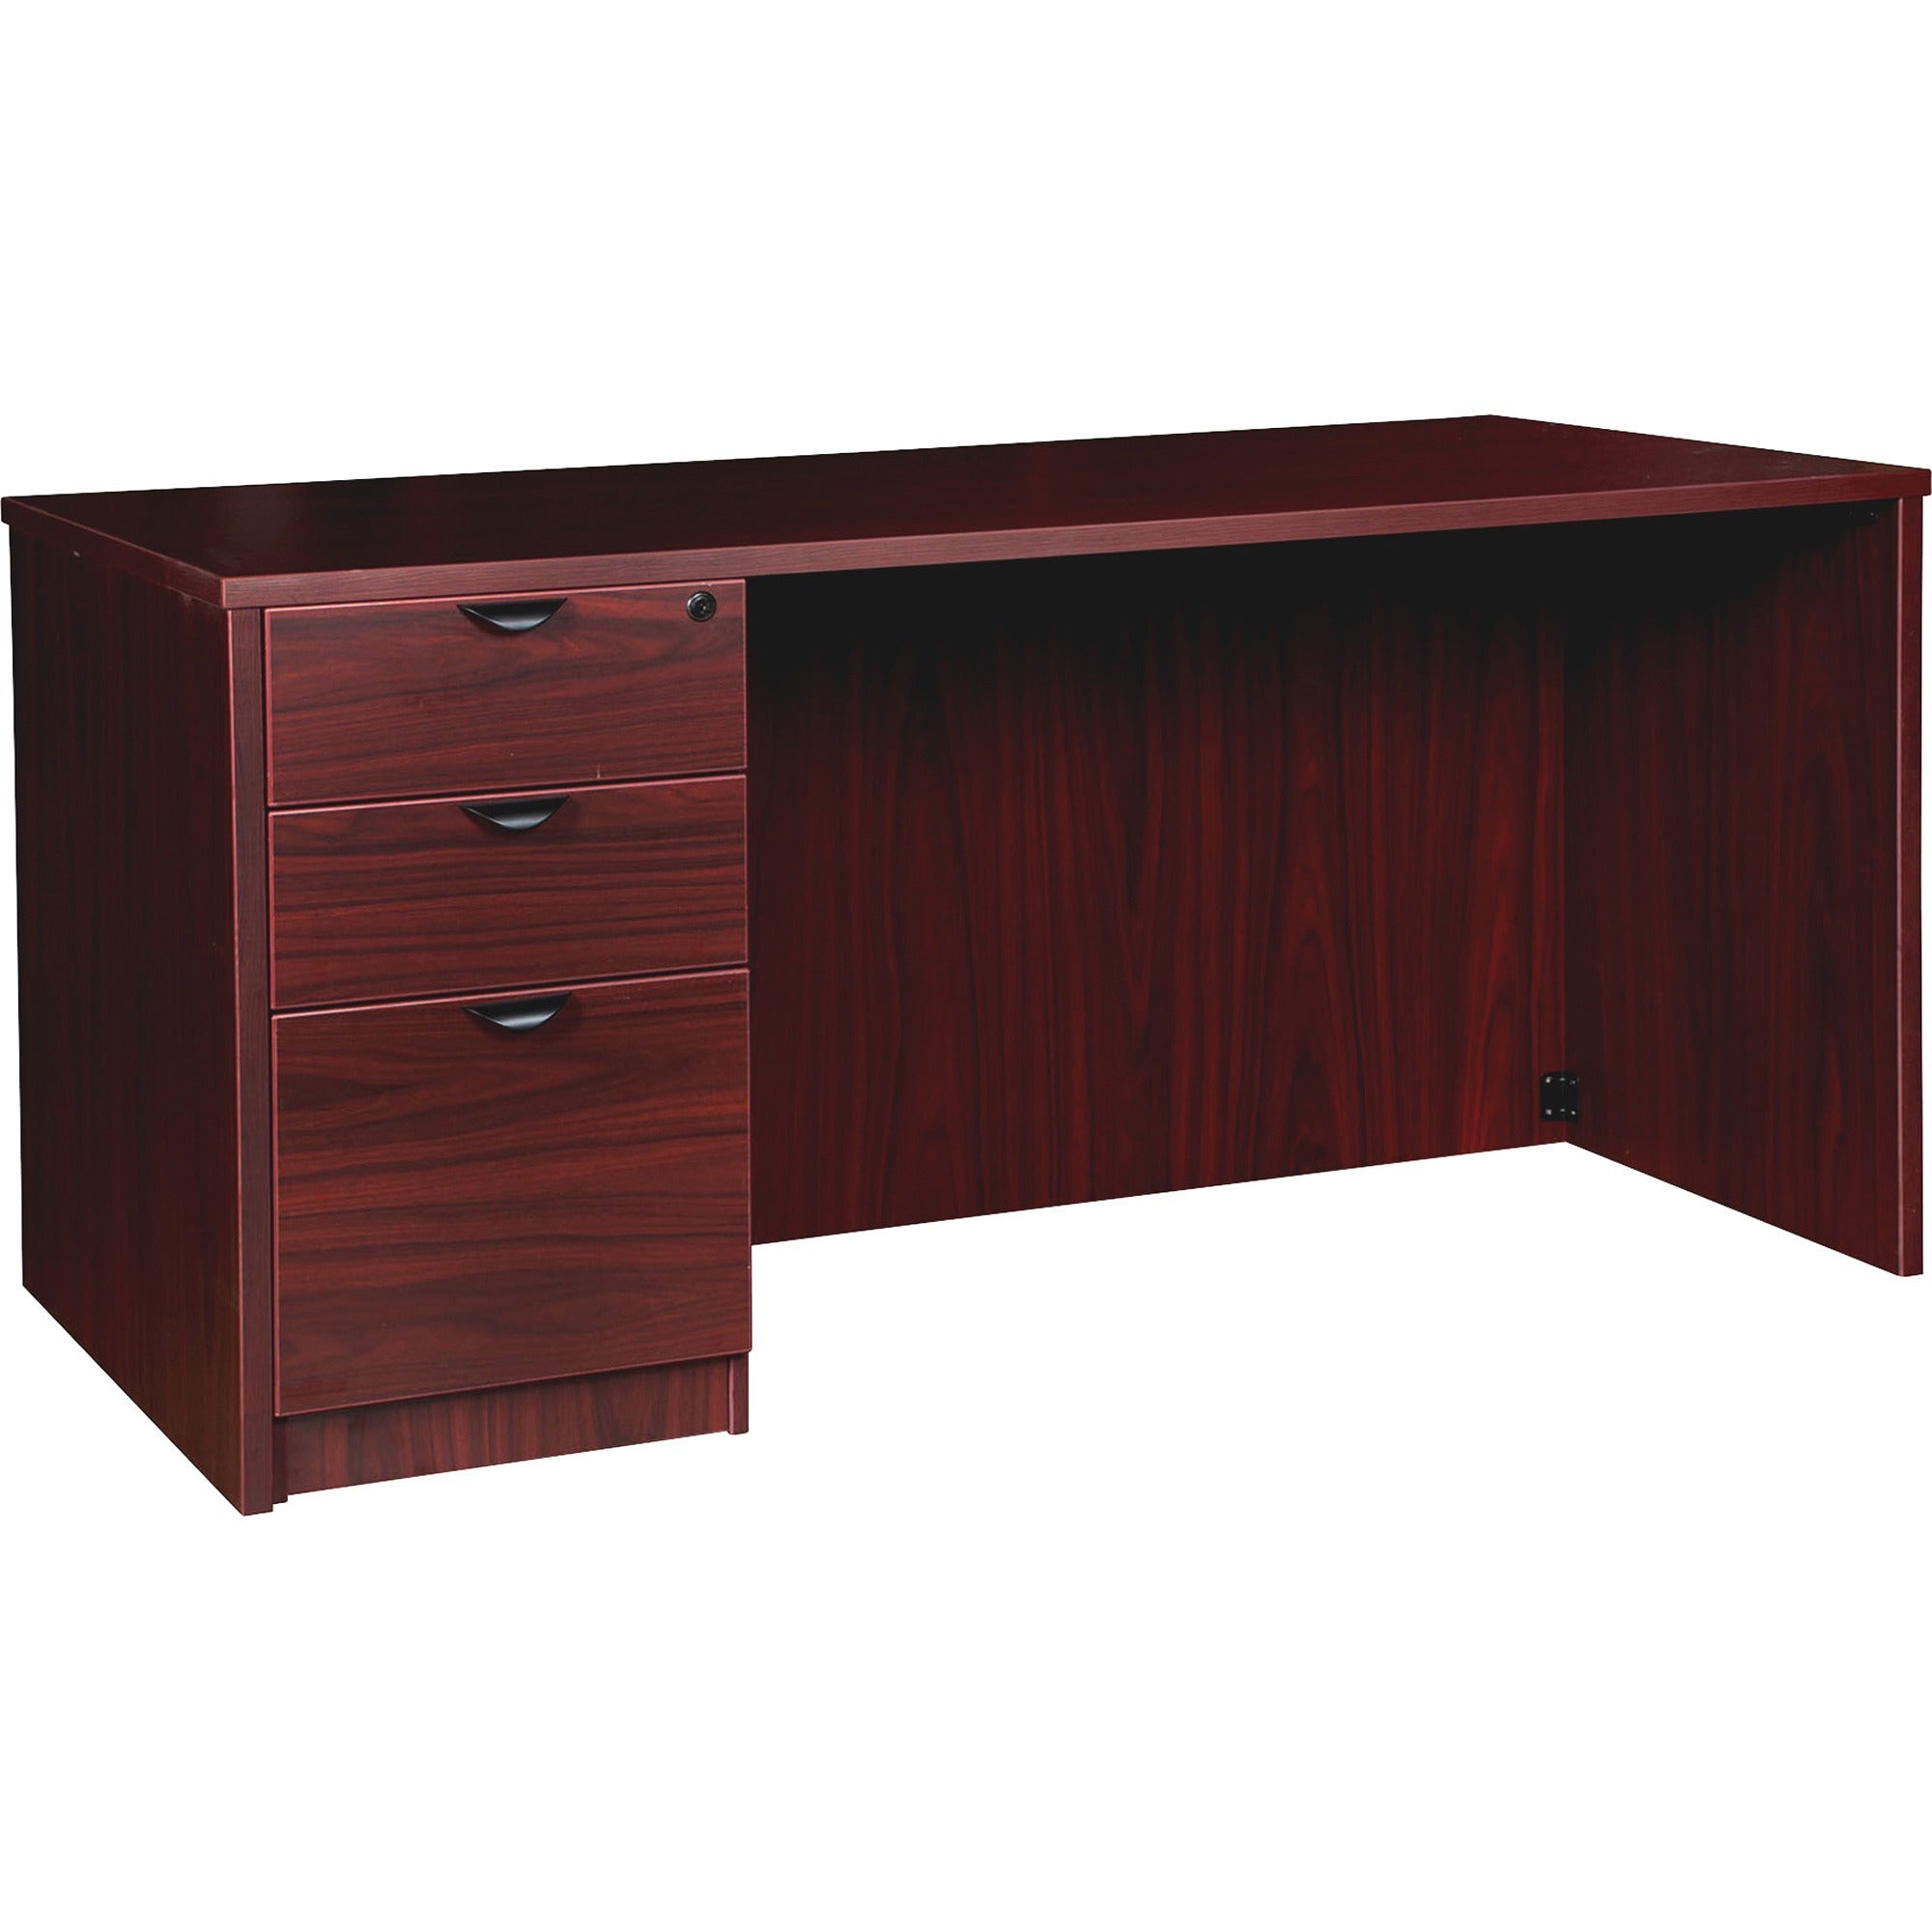 lorell-prominence-20-left-pedestal-desk-1-top-60-x-3029-3-x-file-box-drawers-single-pedestal-on-left-side-band-edge-material-particleboard-finish-mahogany-laminate-thermofused-melamine-tfm_llrpd3060lspmy - 1